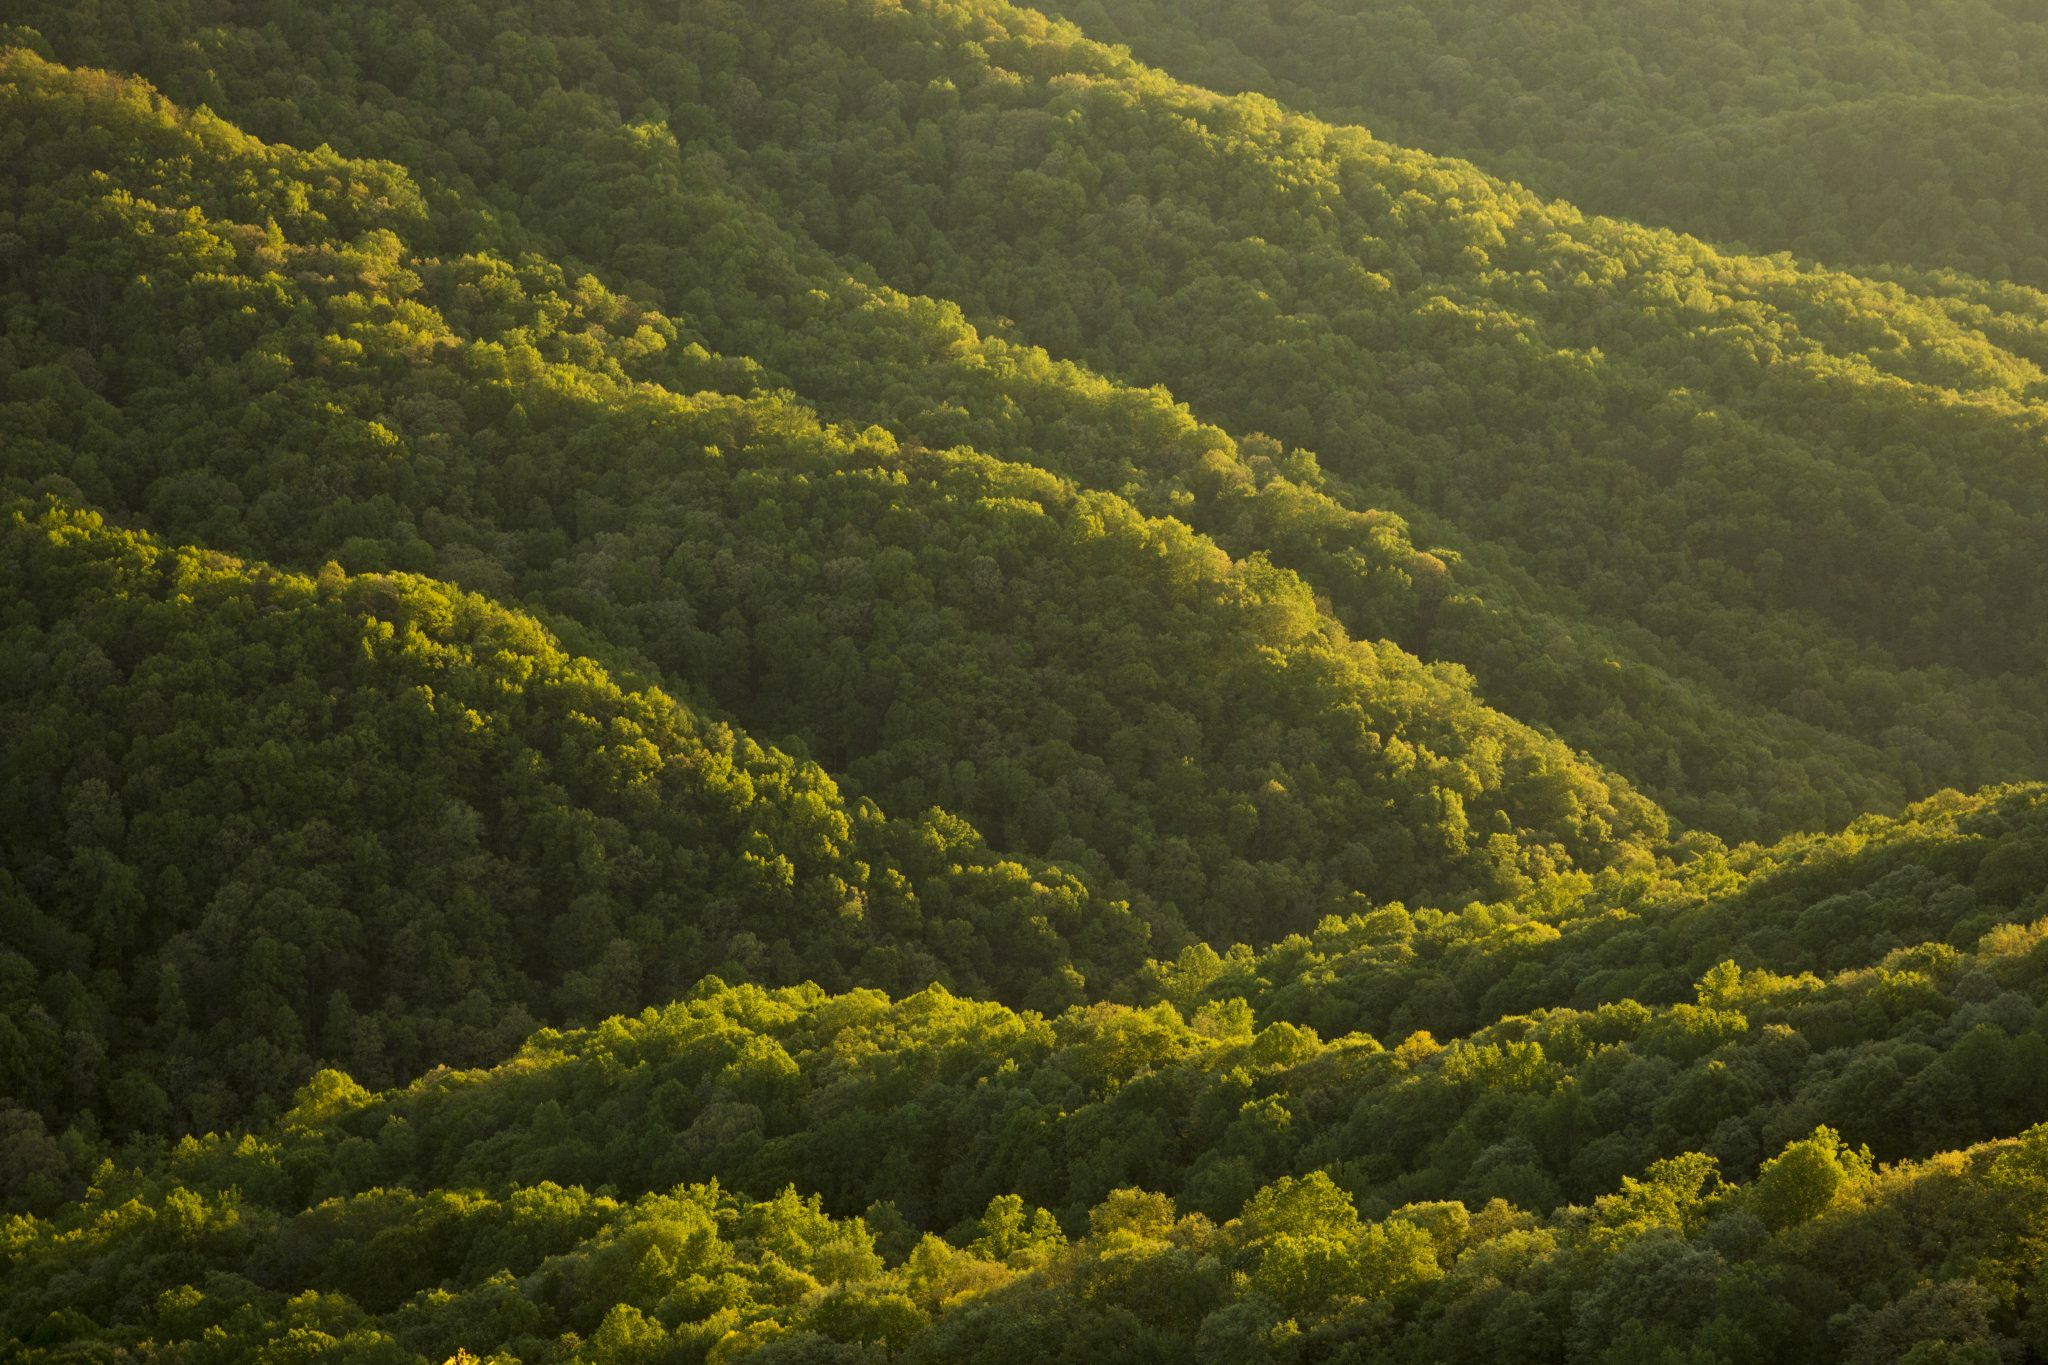 Rolling hills and cove forests in Jones Gap State Park